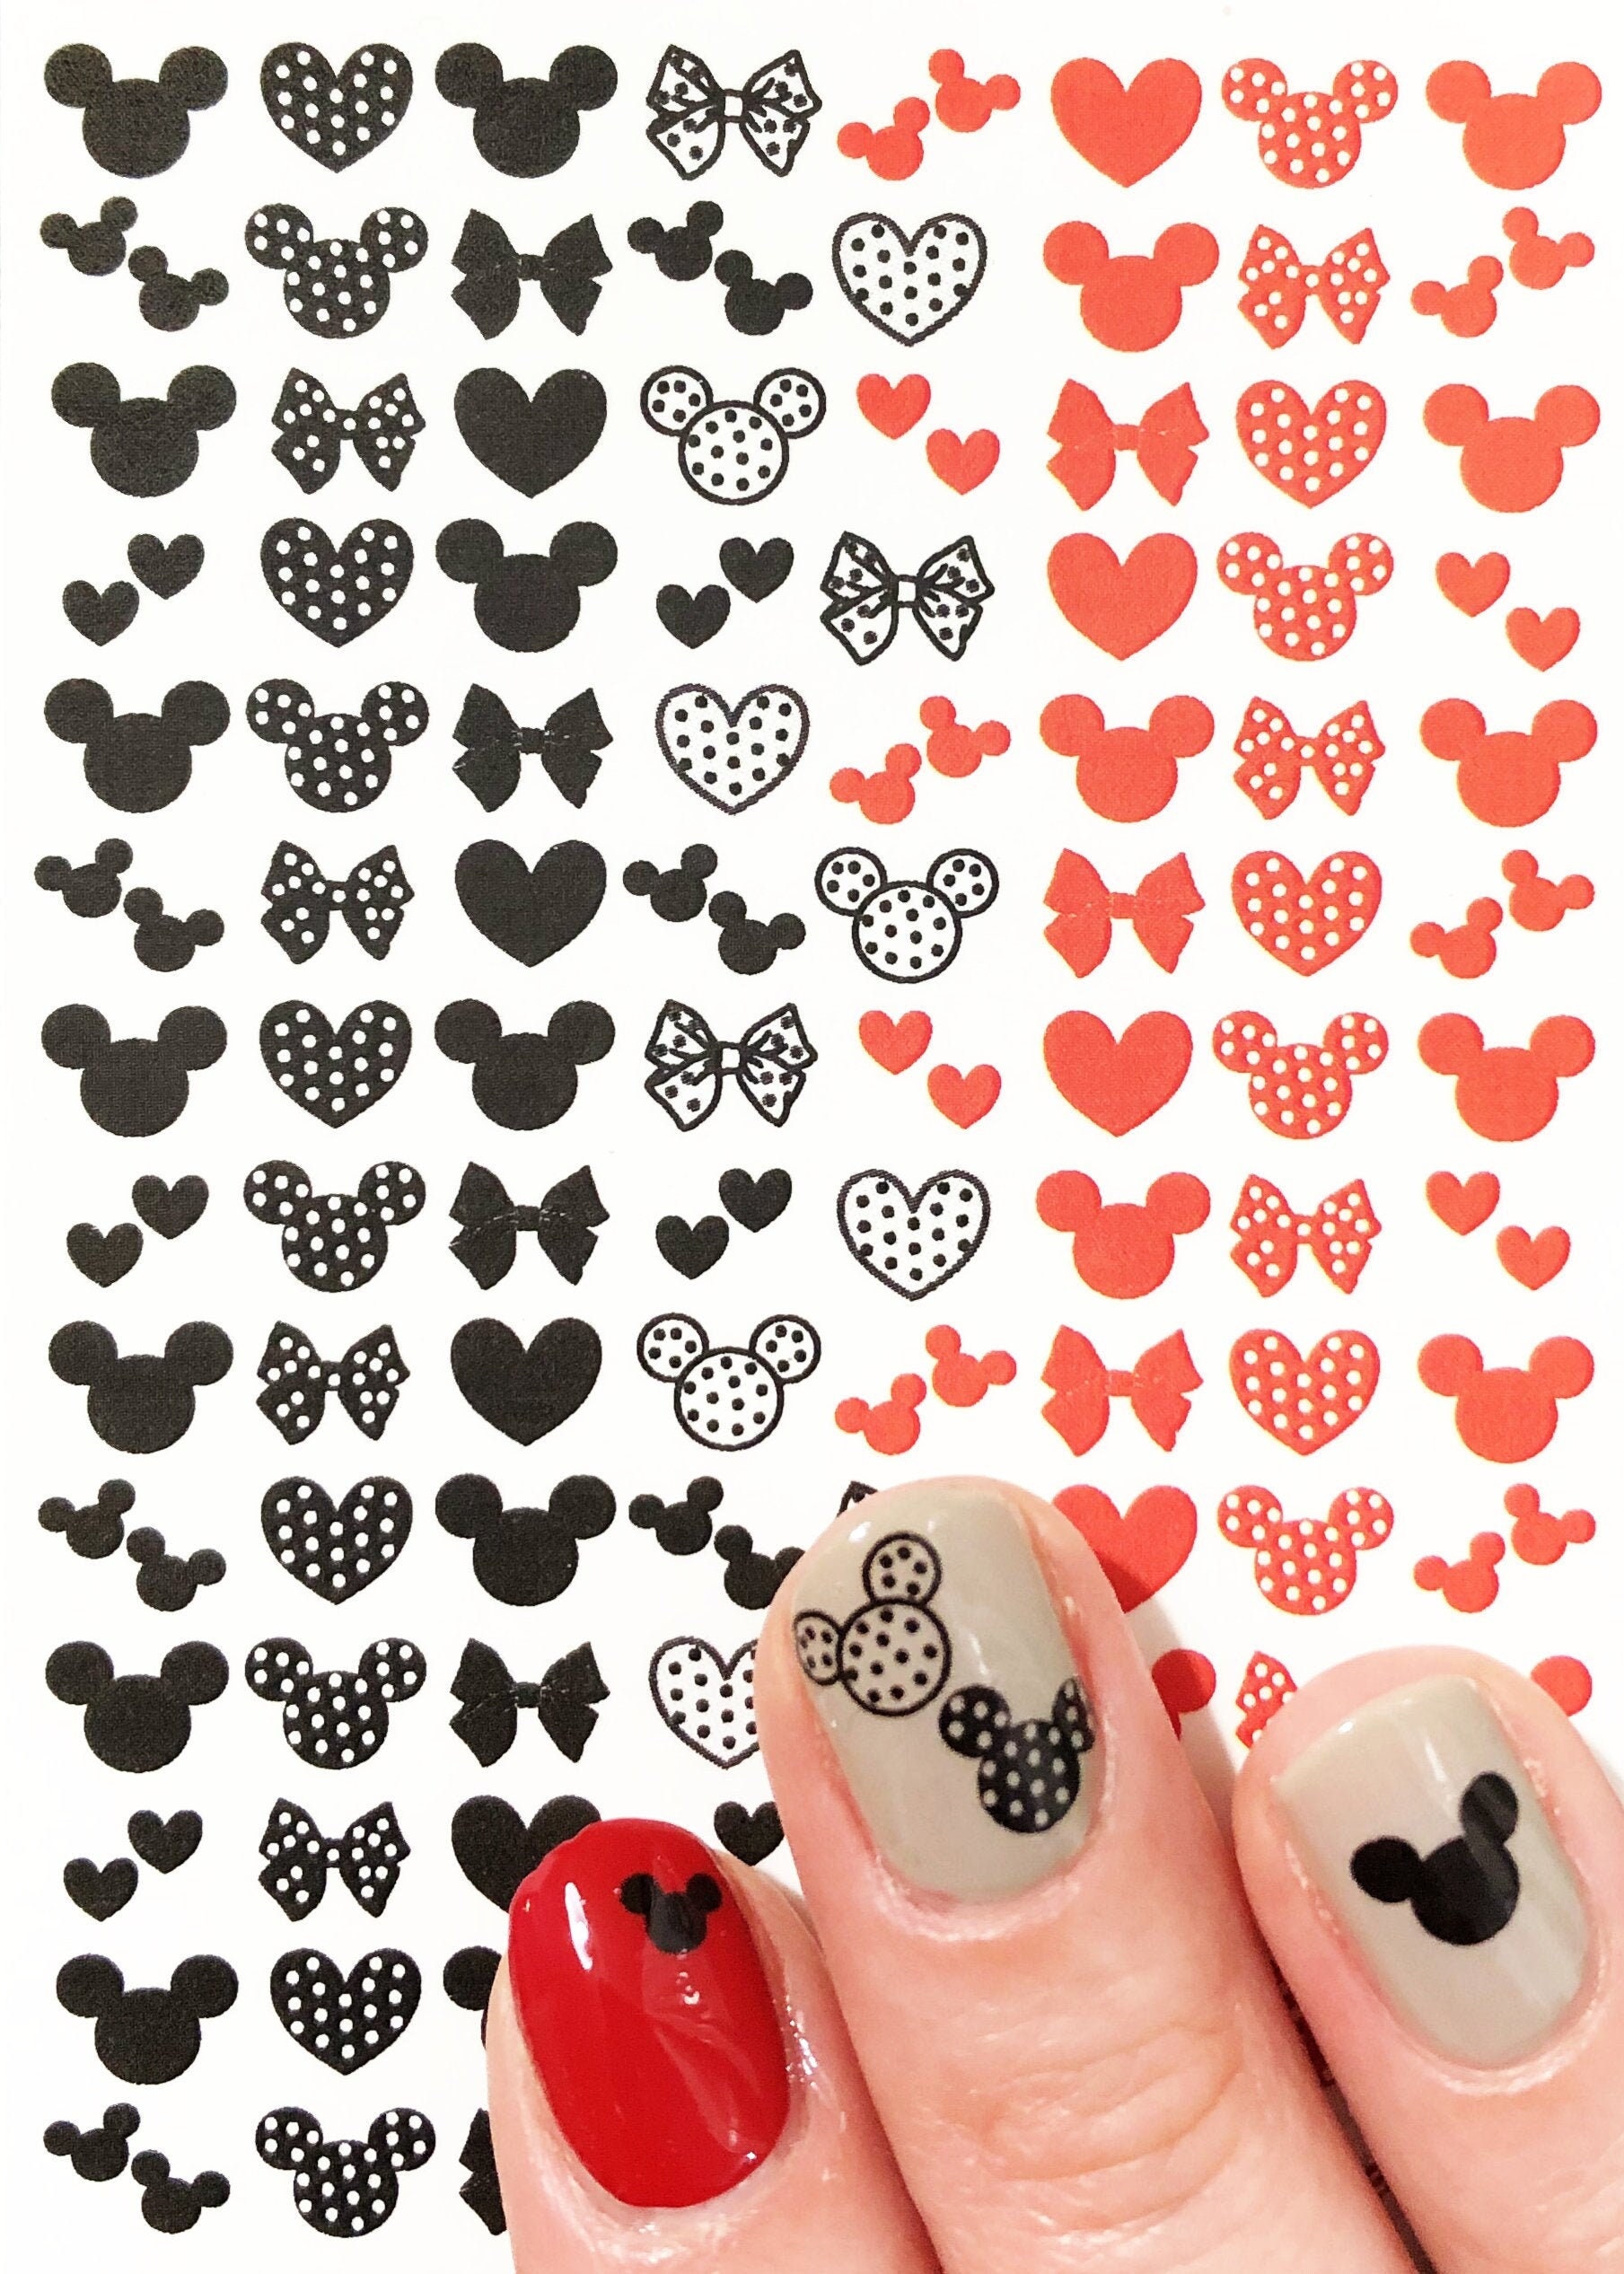 Mickey Mouse Nails Ideas To Inspire You